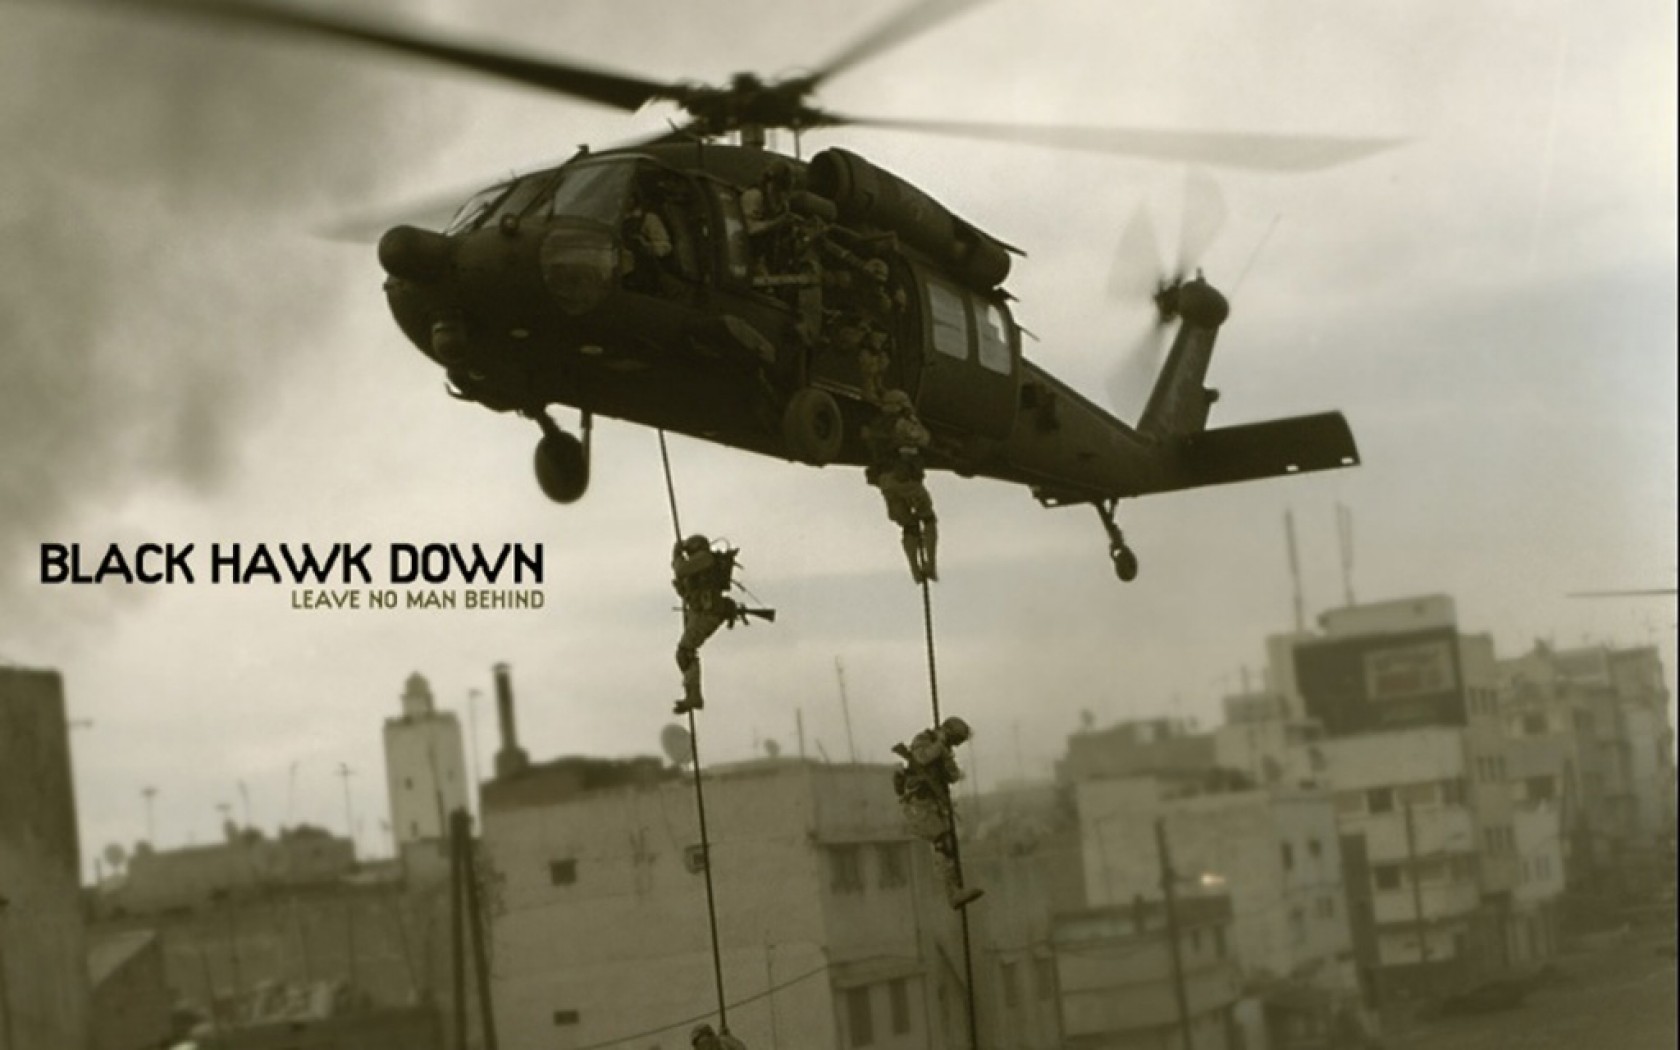 black hawk down, Drama, History, War, Action, Black, Hawk, Down, Military, Helicopter, Battle, Poster Wallpaper